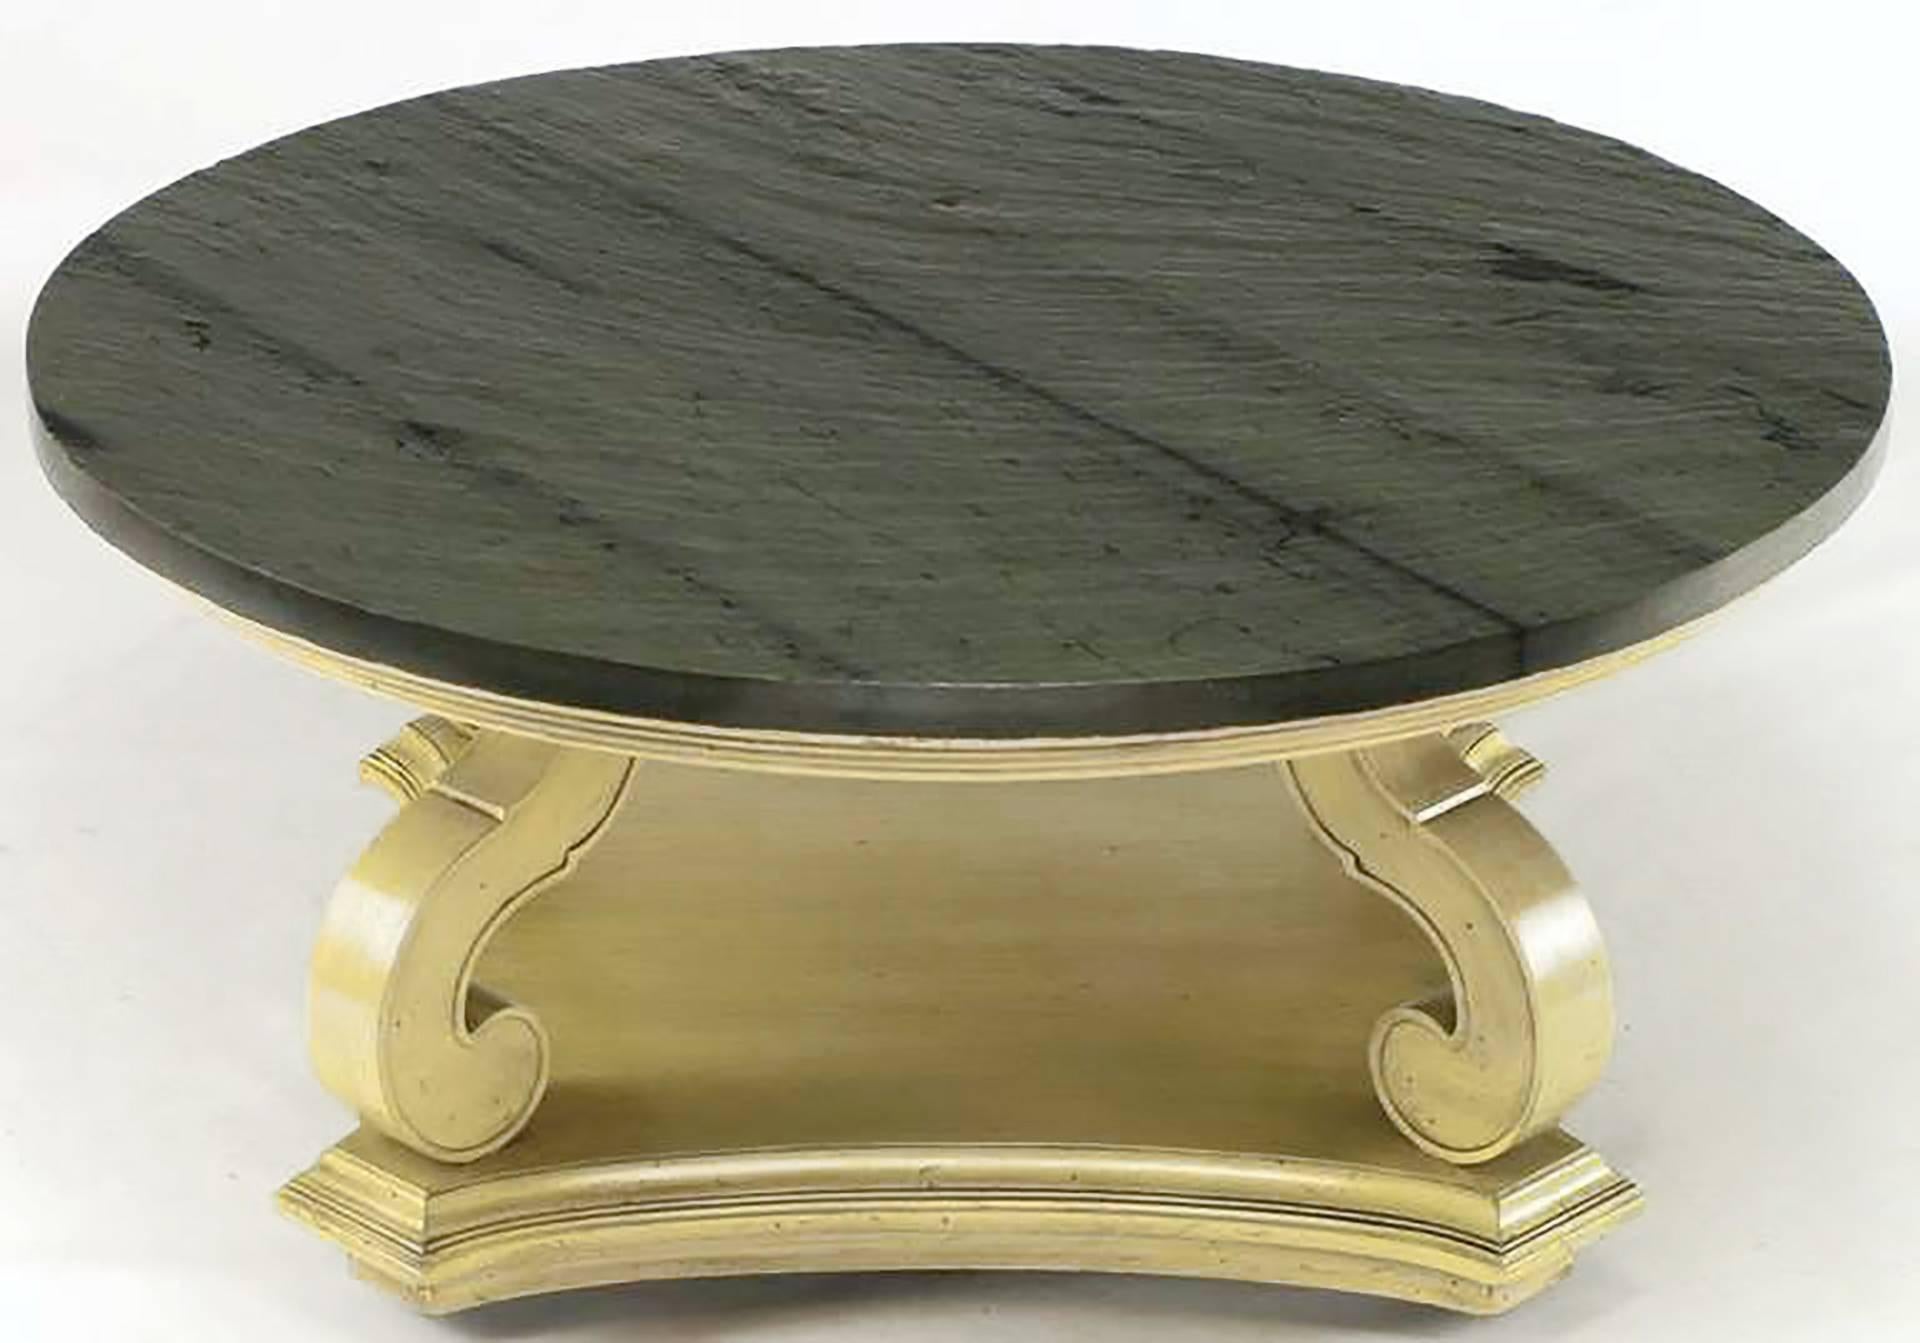 A Dorothy Draper design from her iconic Espana collection, this exceptional Heritage Henredon round coffee table is comprised of hand-carved wood with an ivory glaze. Reverse quatrefoil, canted corner base is on casters for ease in movement. Natural